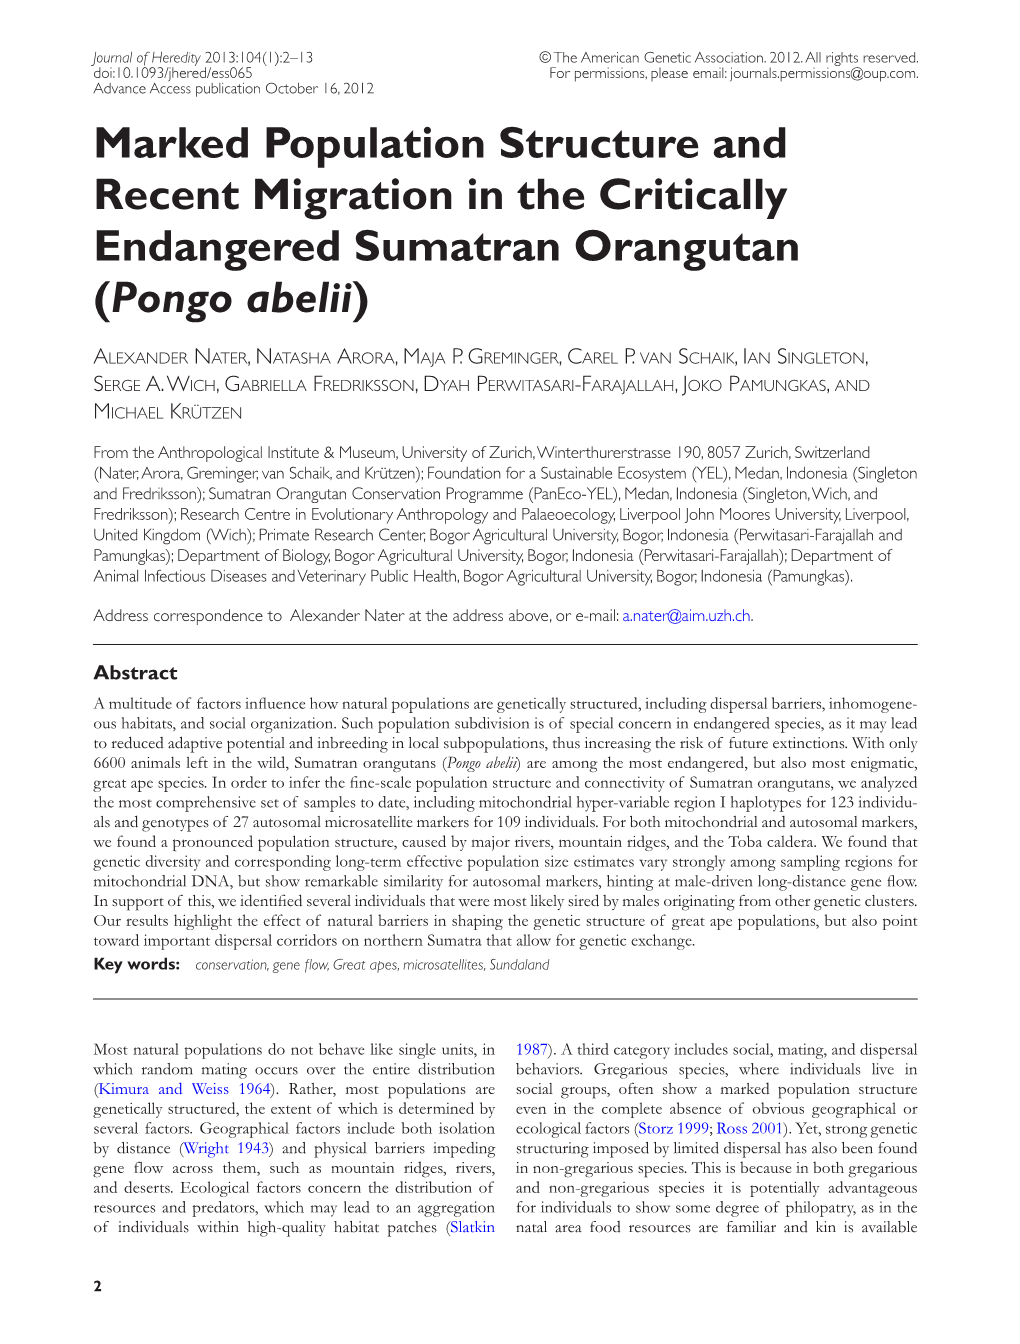 Marked Population Structure and Recent Migration in the Critically